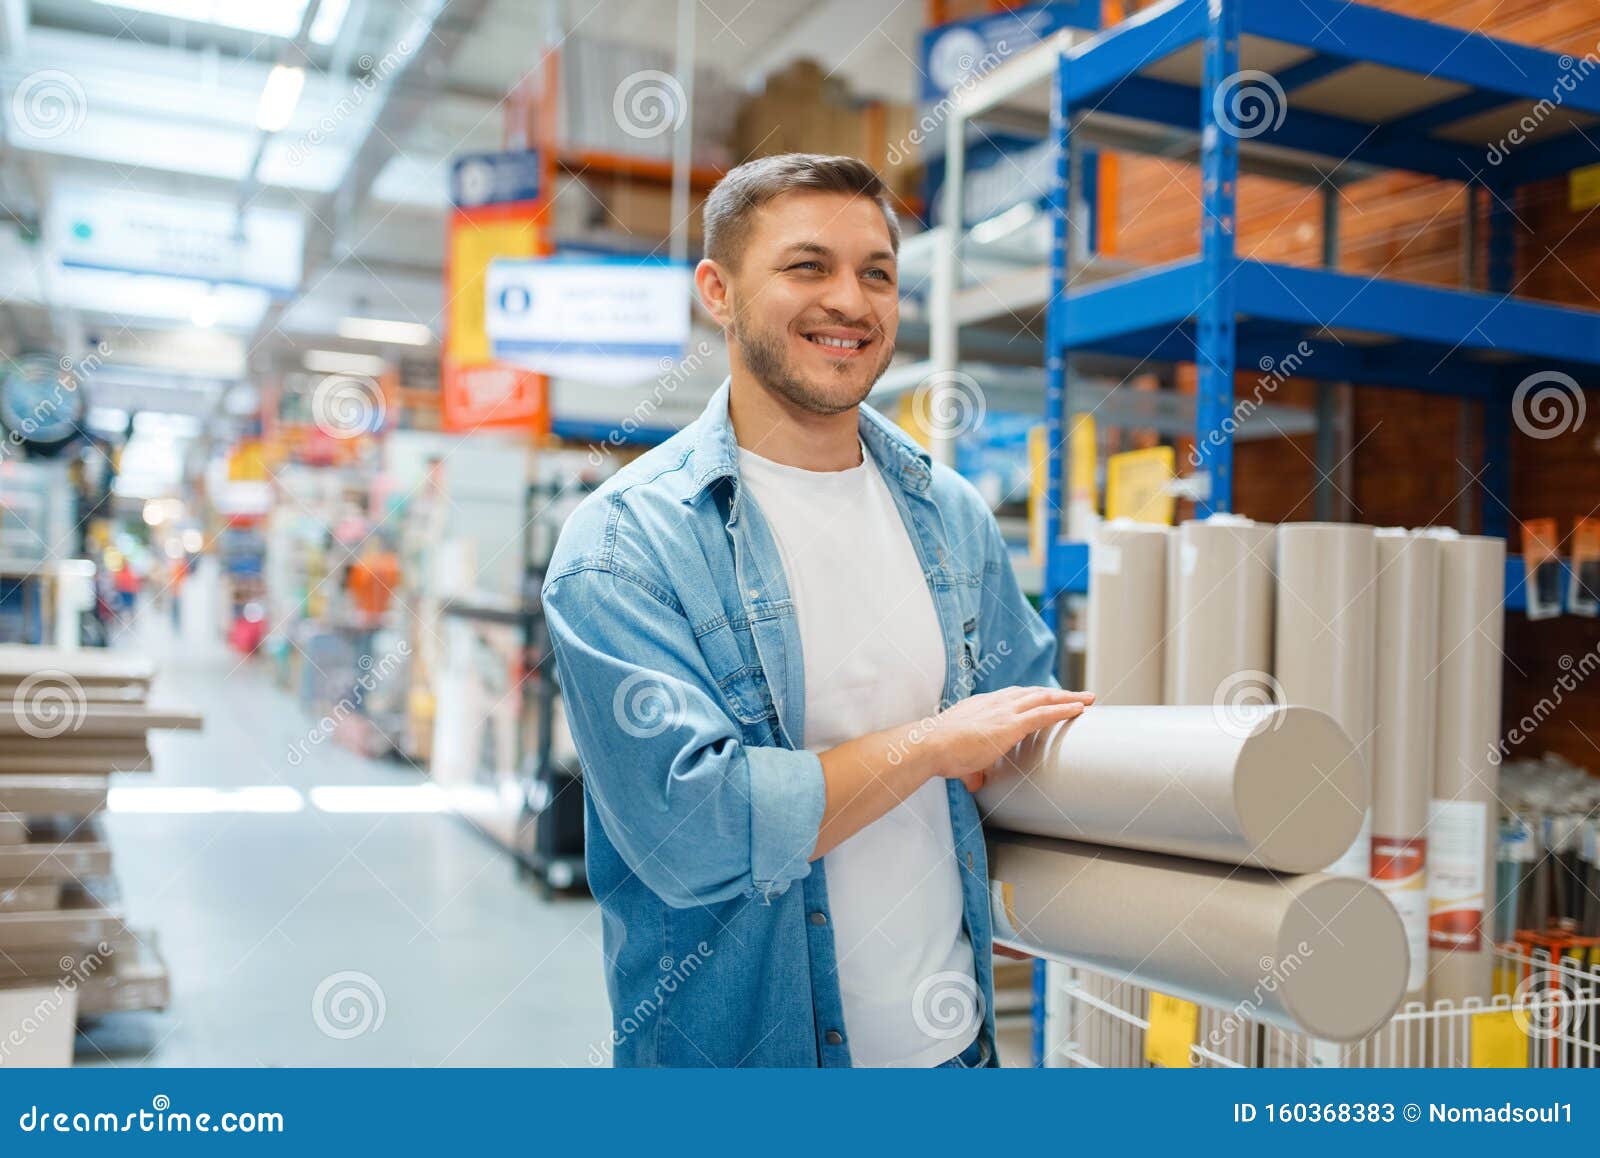 Male Consumer Buying Wallpapers in Hardware Store Stock Image - Image of  purchase, choosing: 160368383